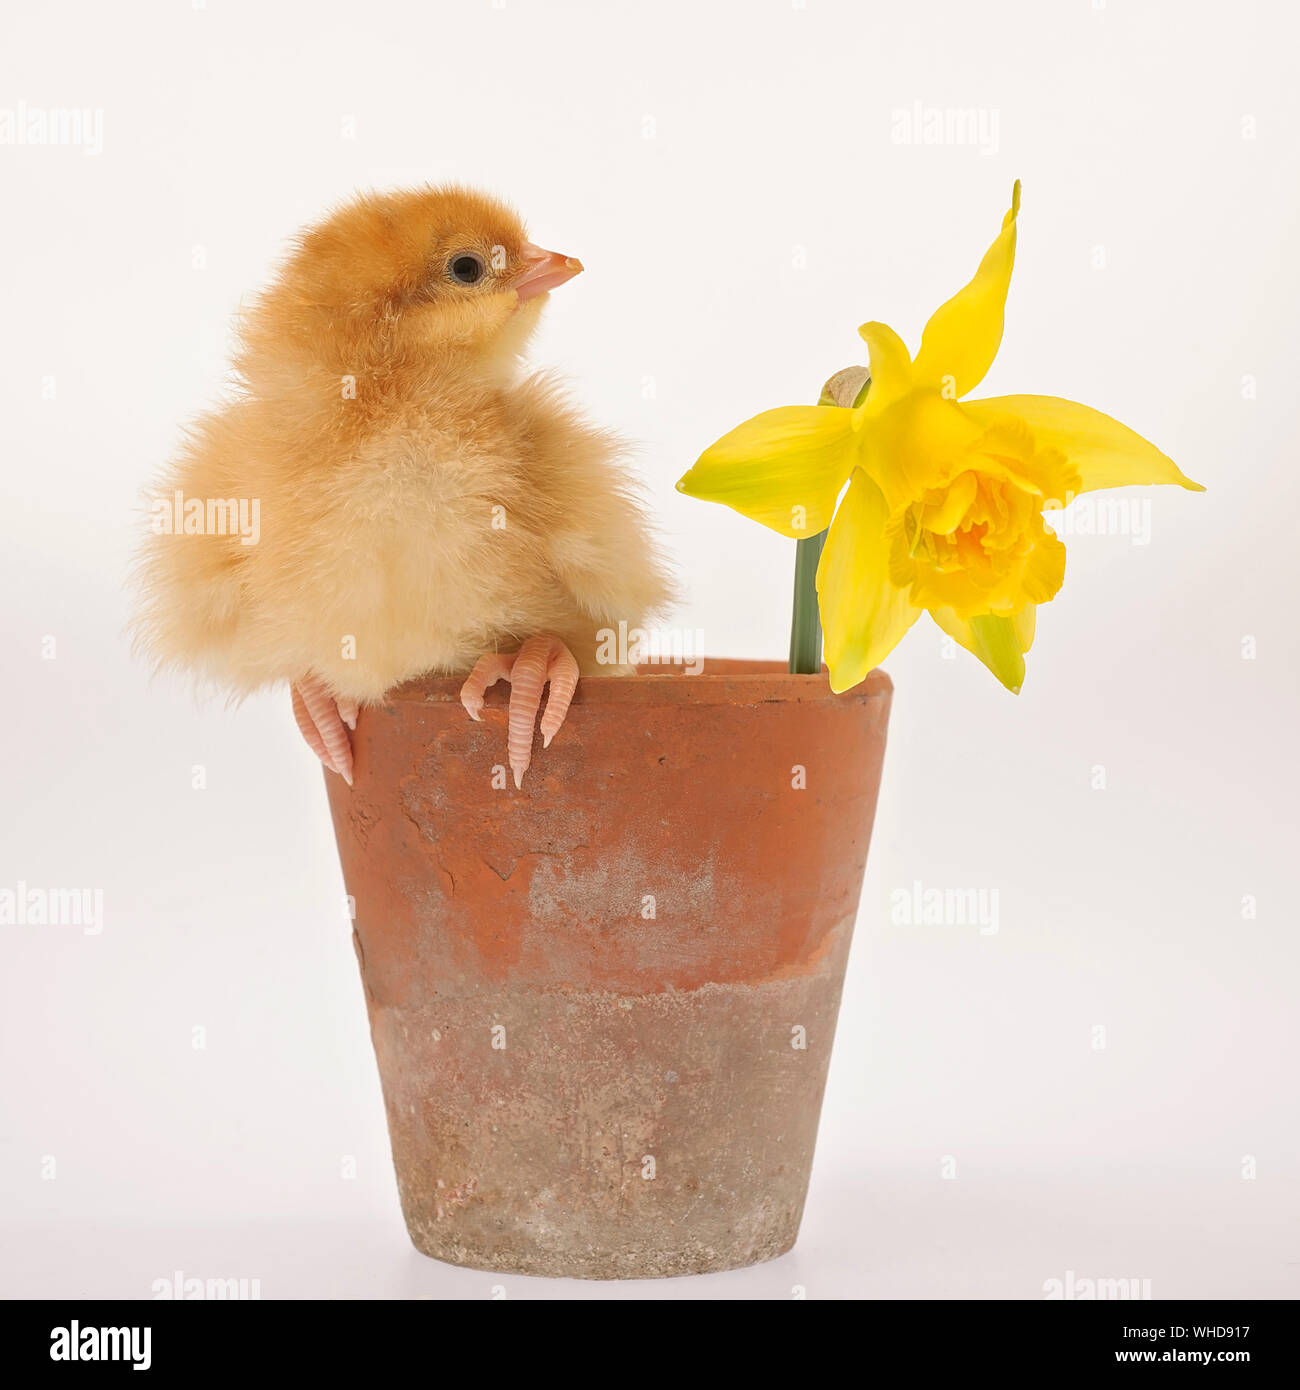 Baby chick sitting on a terracotta flowerpot and daffodil flower Stock Photo